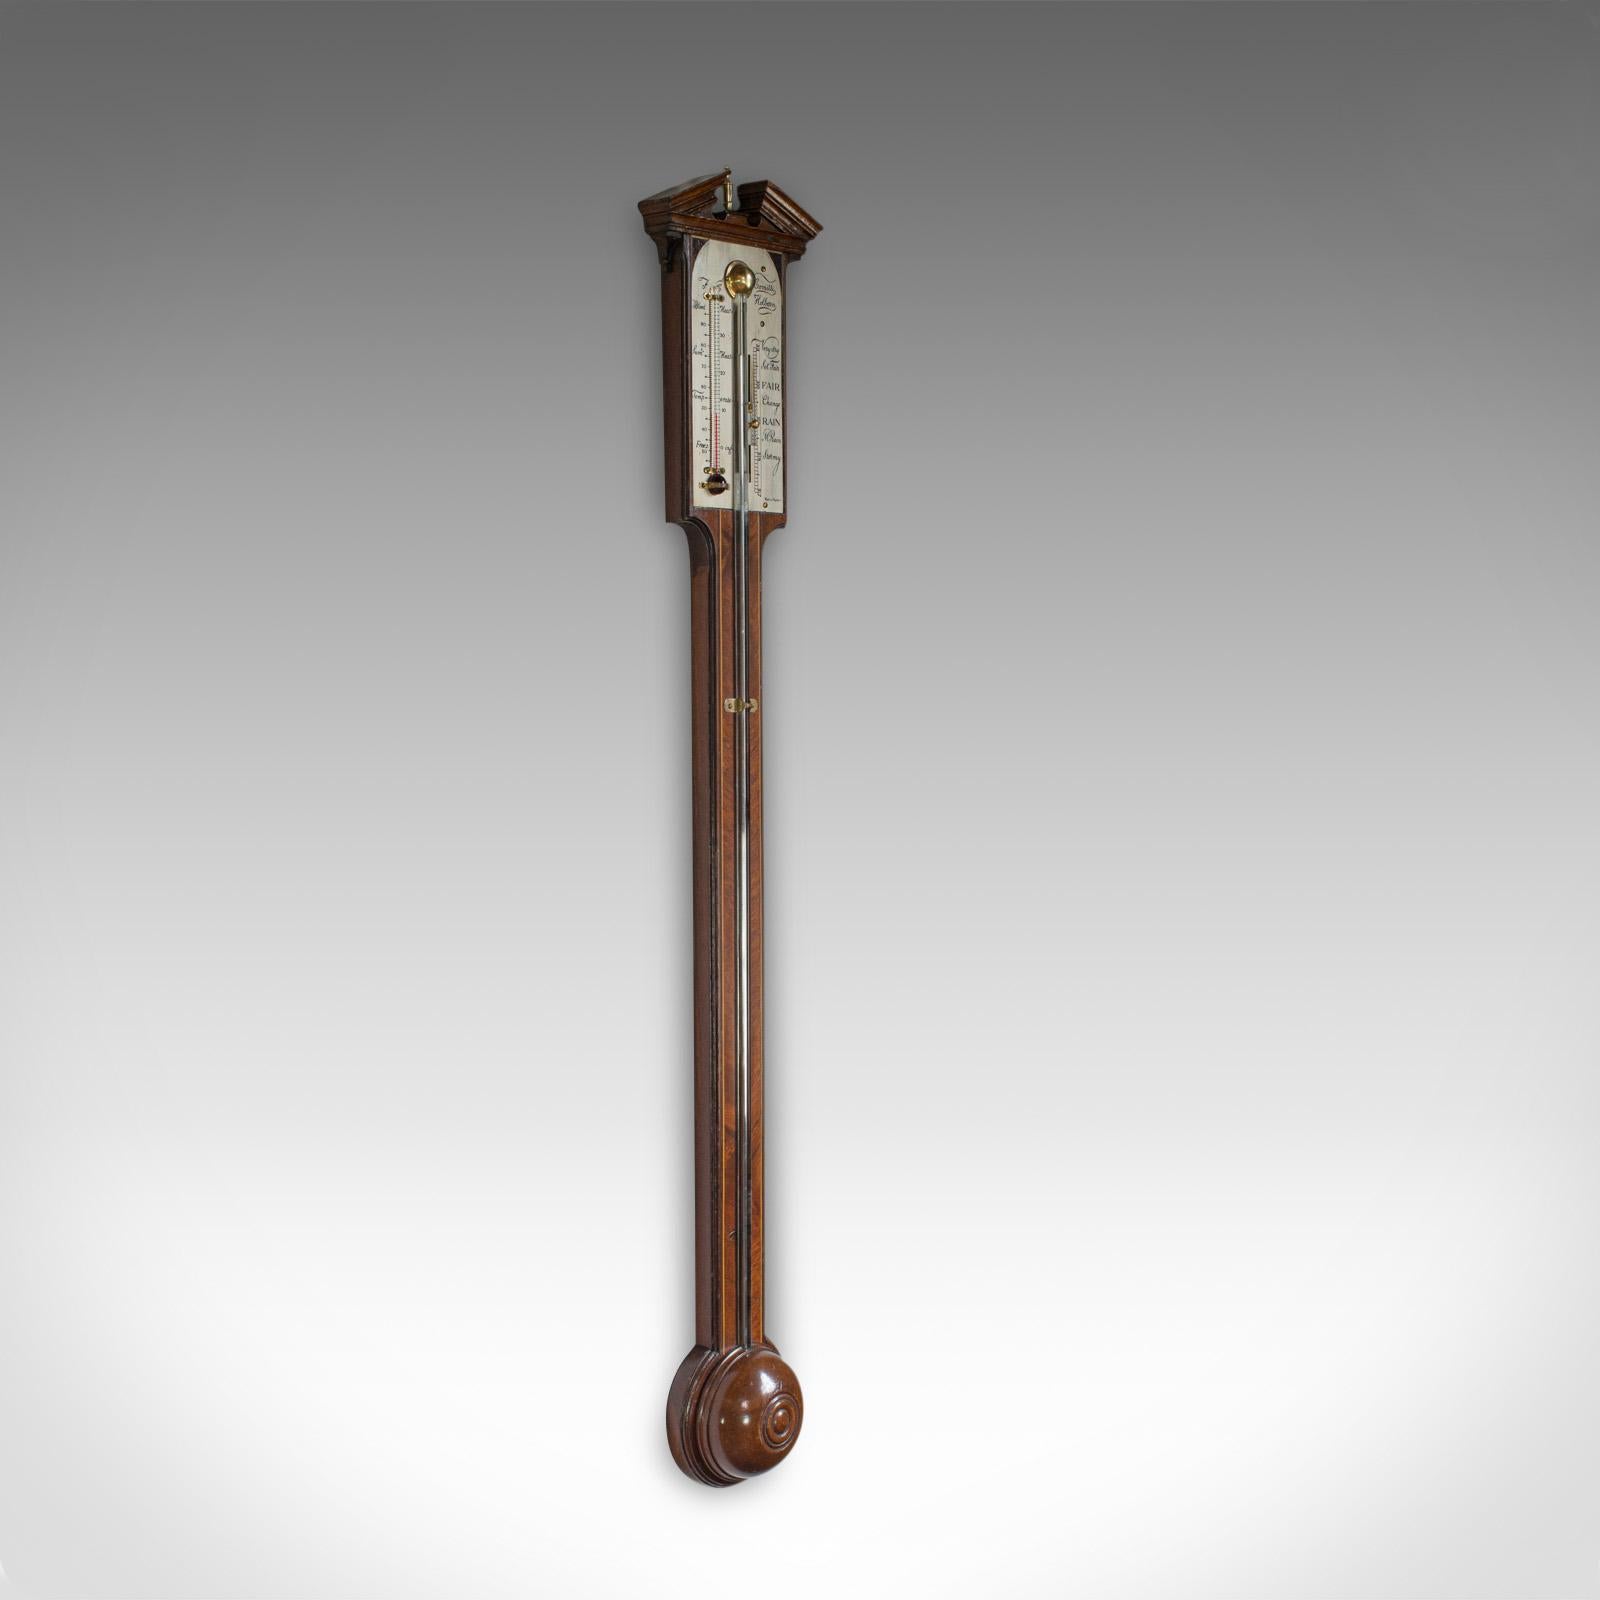 This is an antique Comitti stick barometer. An English, rosewood and mahogany feather fan barometer dating to the early 20th century, circa 1910.

Select cuts of rosewood display rich hues throughout
Displays a desirable aged patina
Original